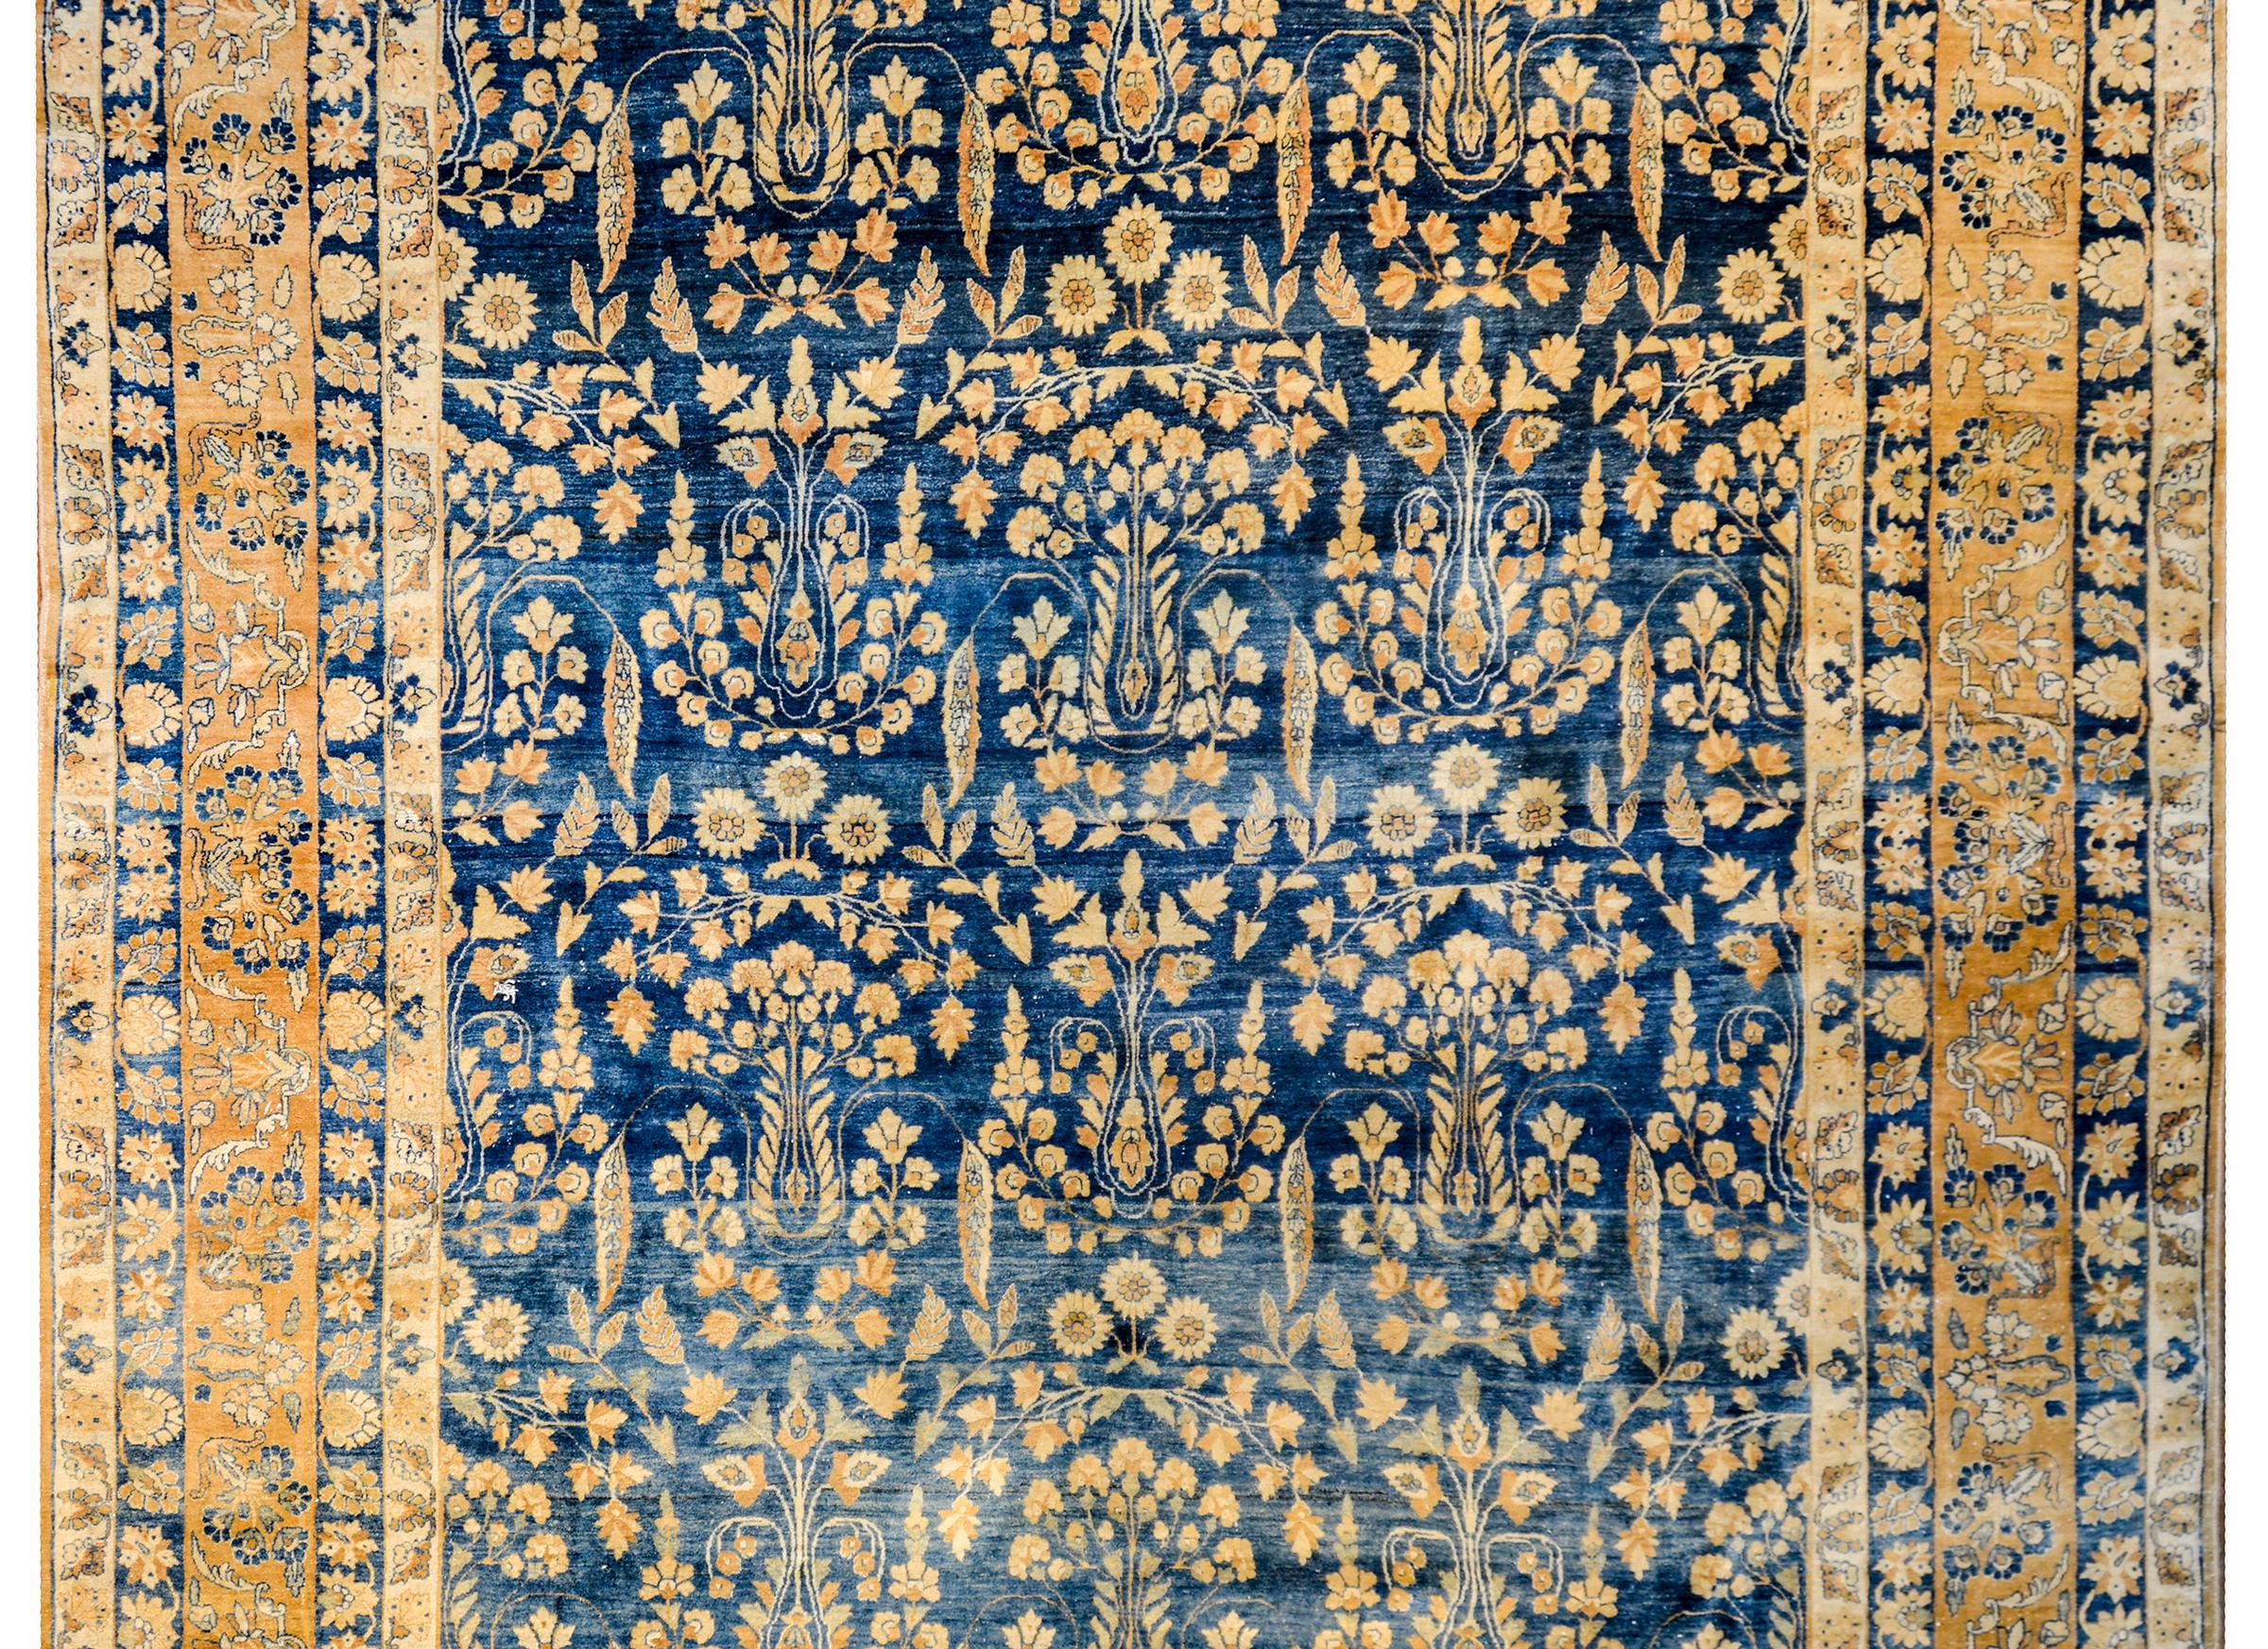 An unbelievable and extraordinary early 20th century Persian Lavar Kirman rug with a brilliant tree-of-life pattern woven in natural creams and champagne colored wool, on a bold abrash indigo background. The border is equally beautiful with multiple